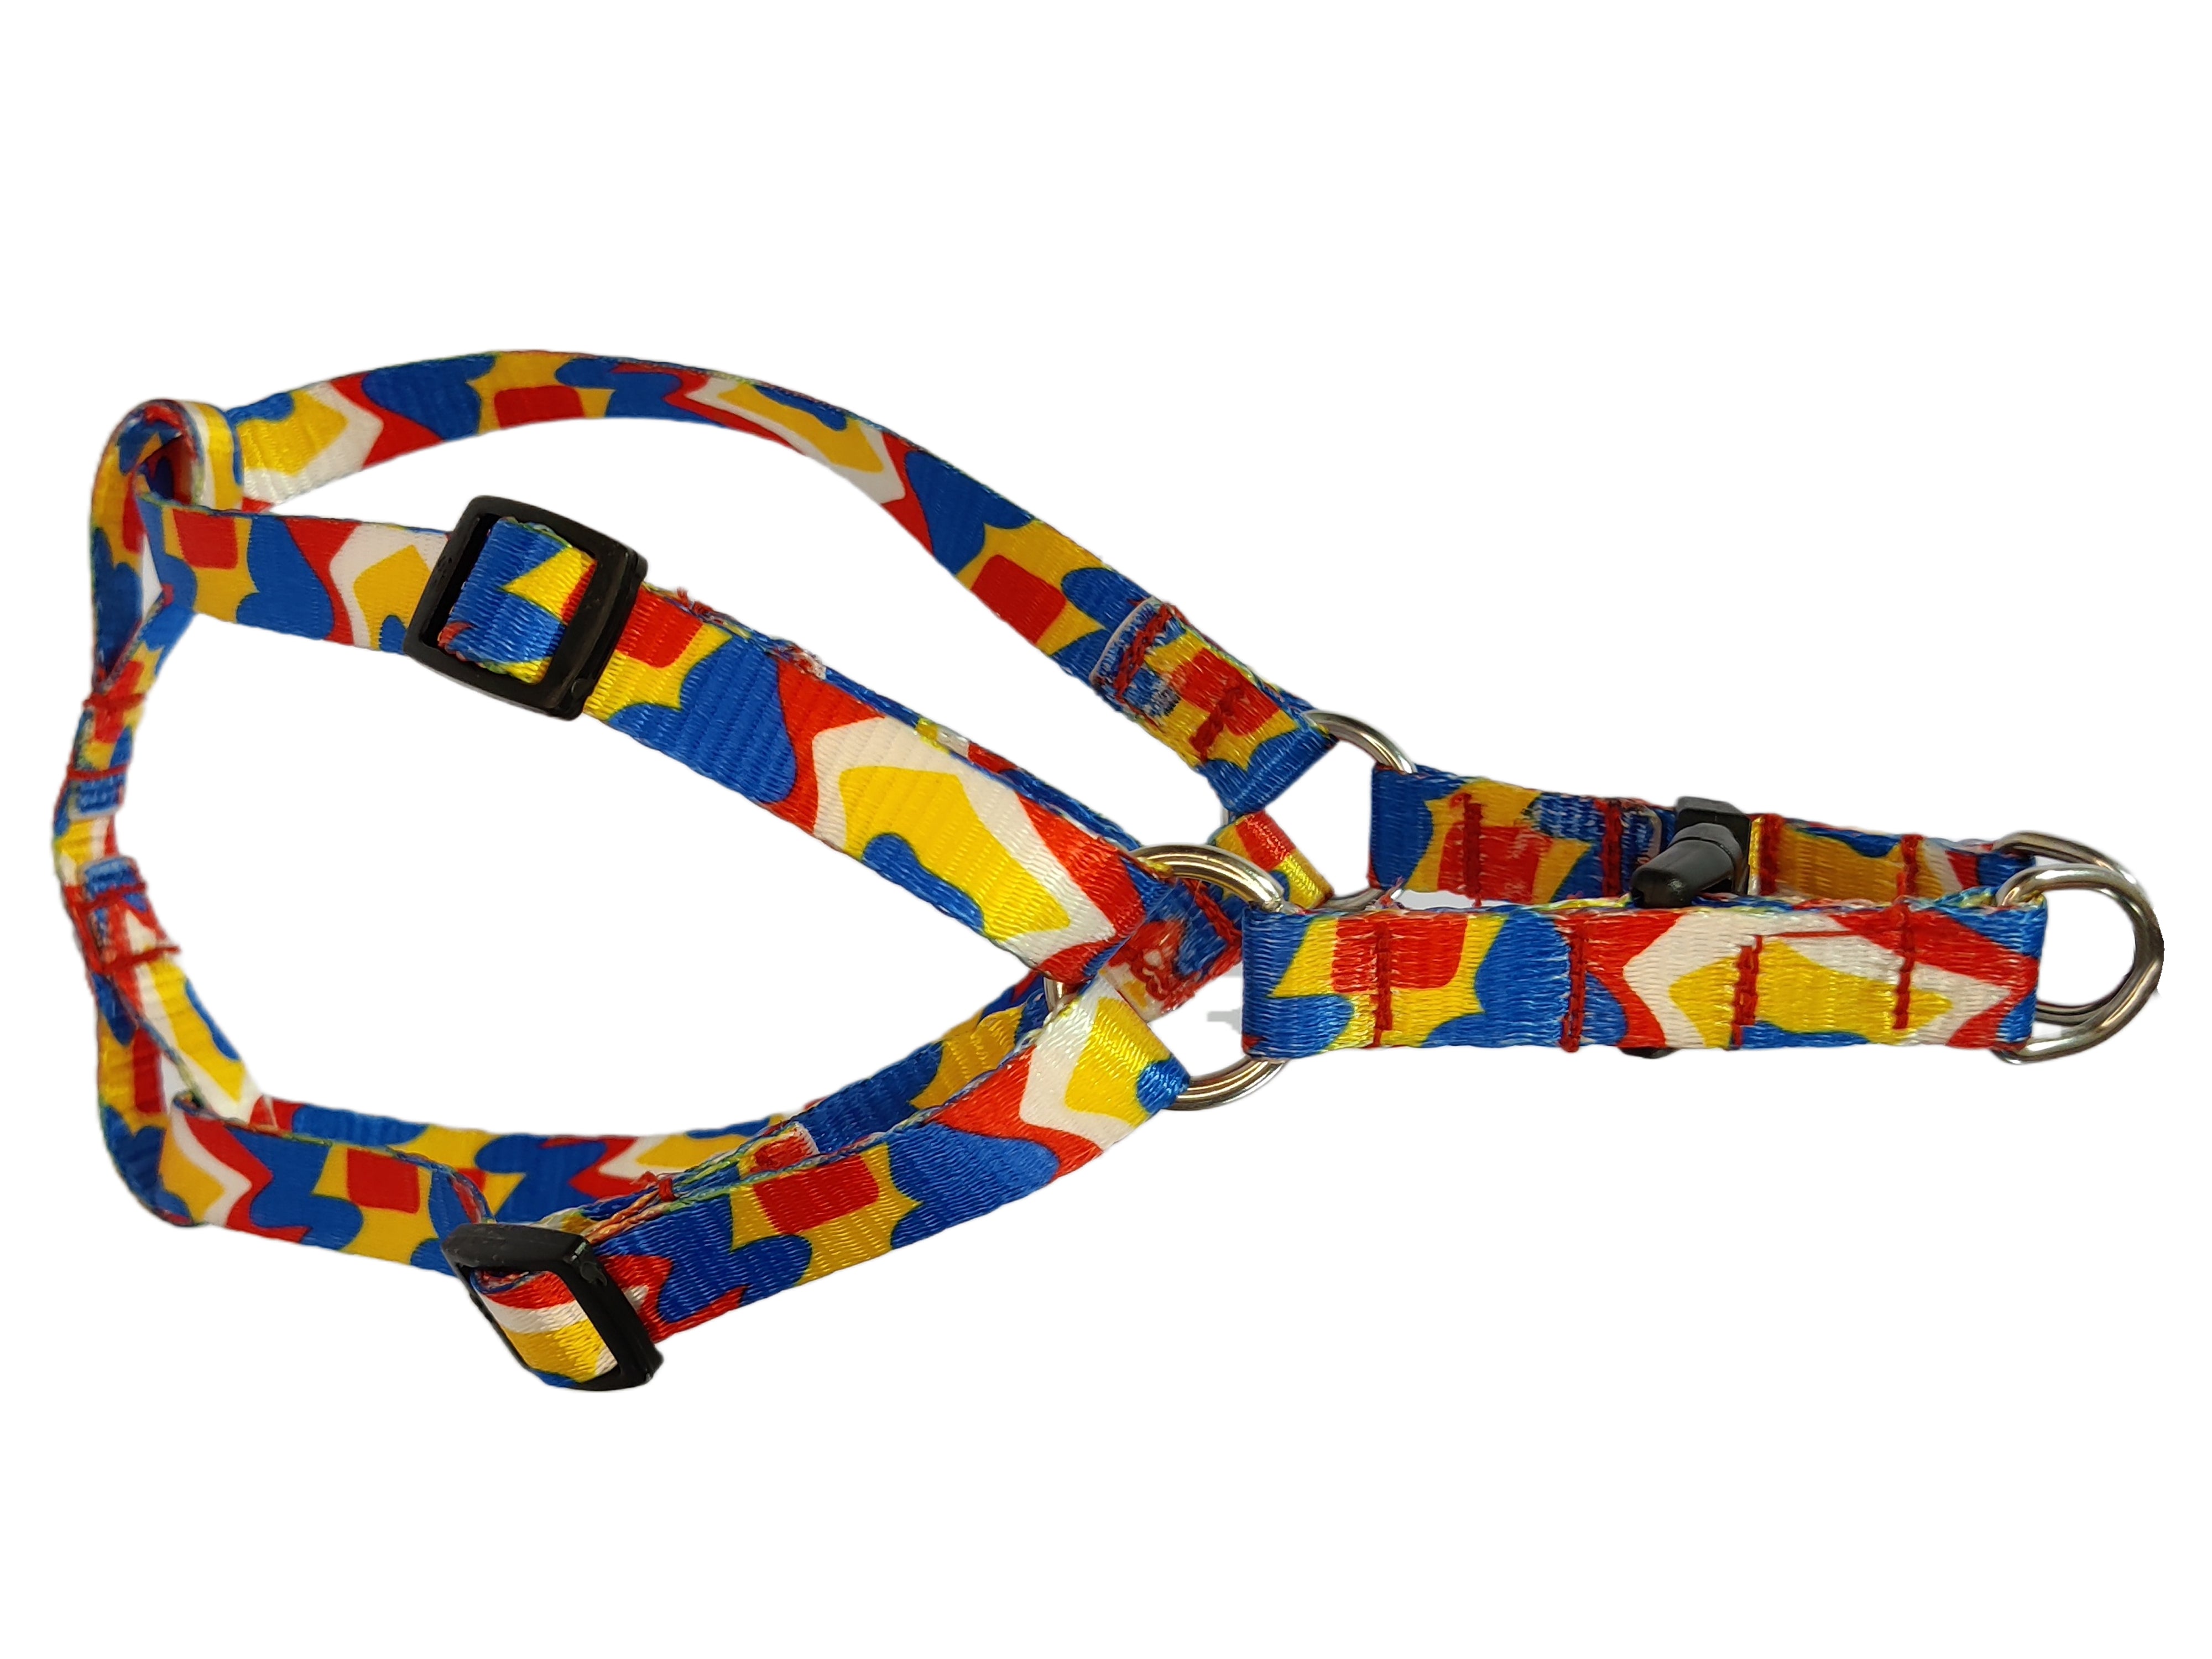 Printed polyester Harness Leash Set